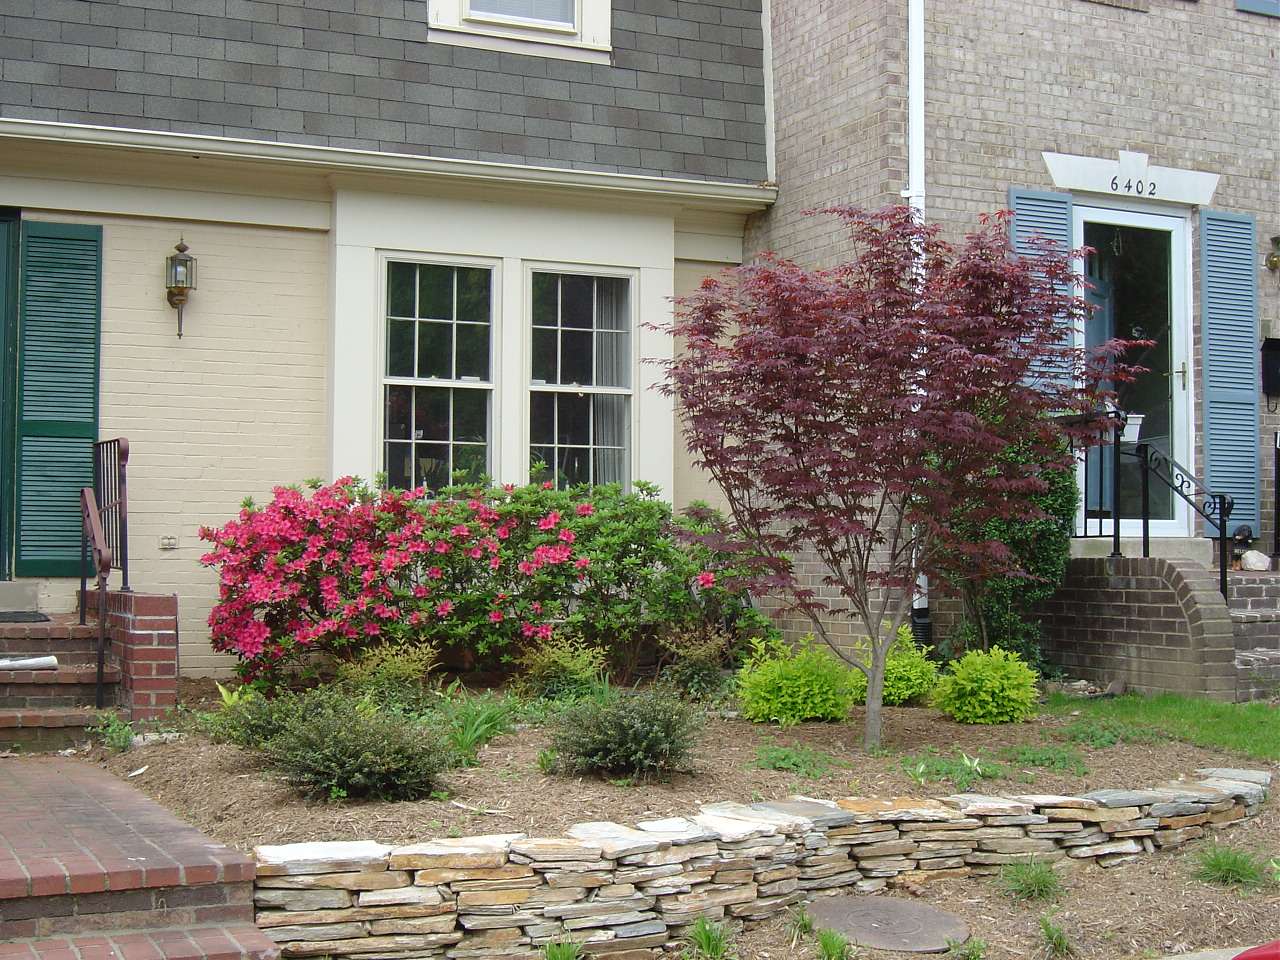 Townhouse with curb appeal from colorful plants